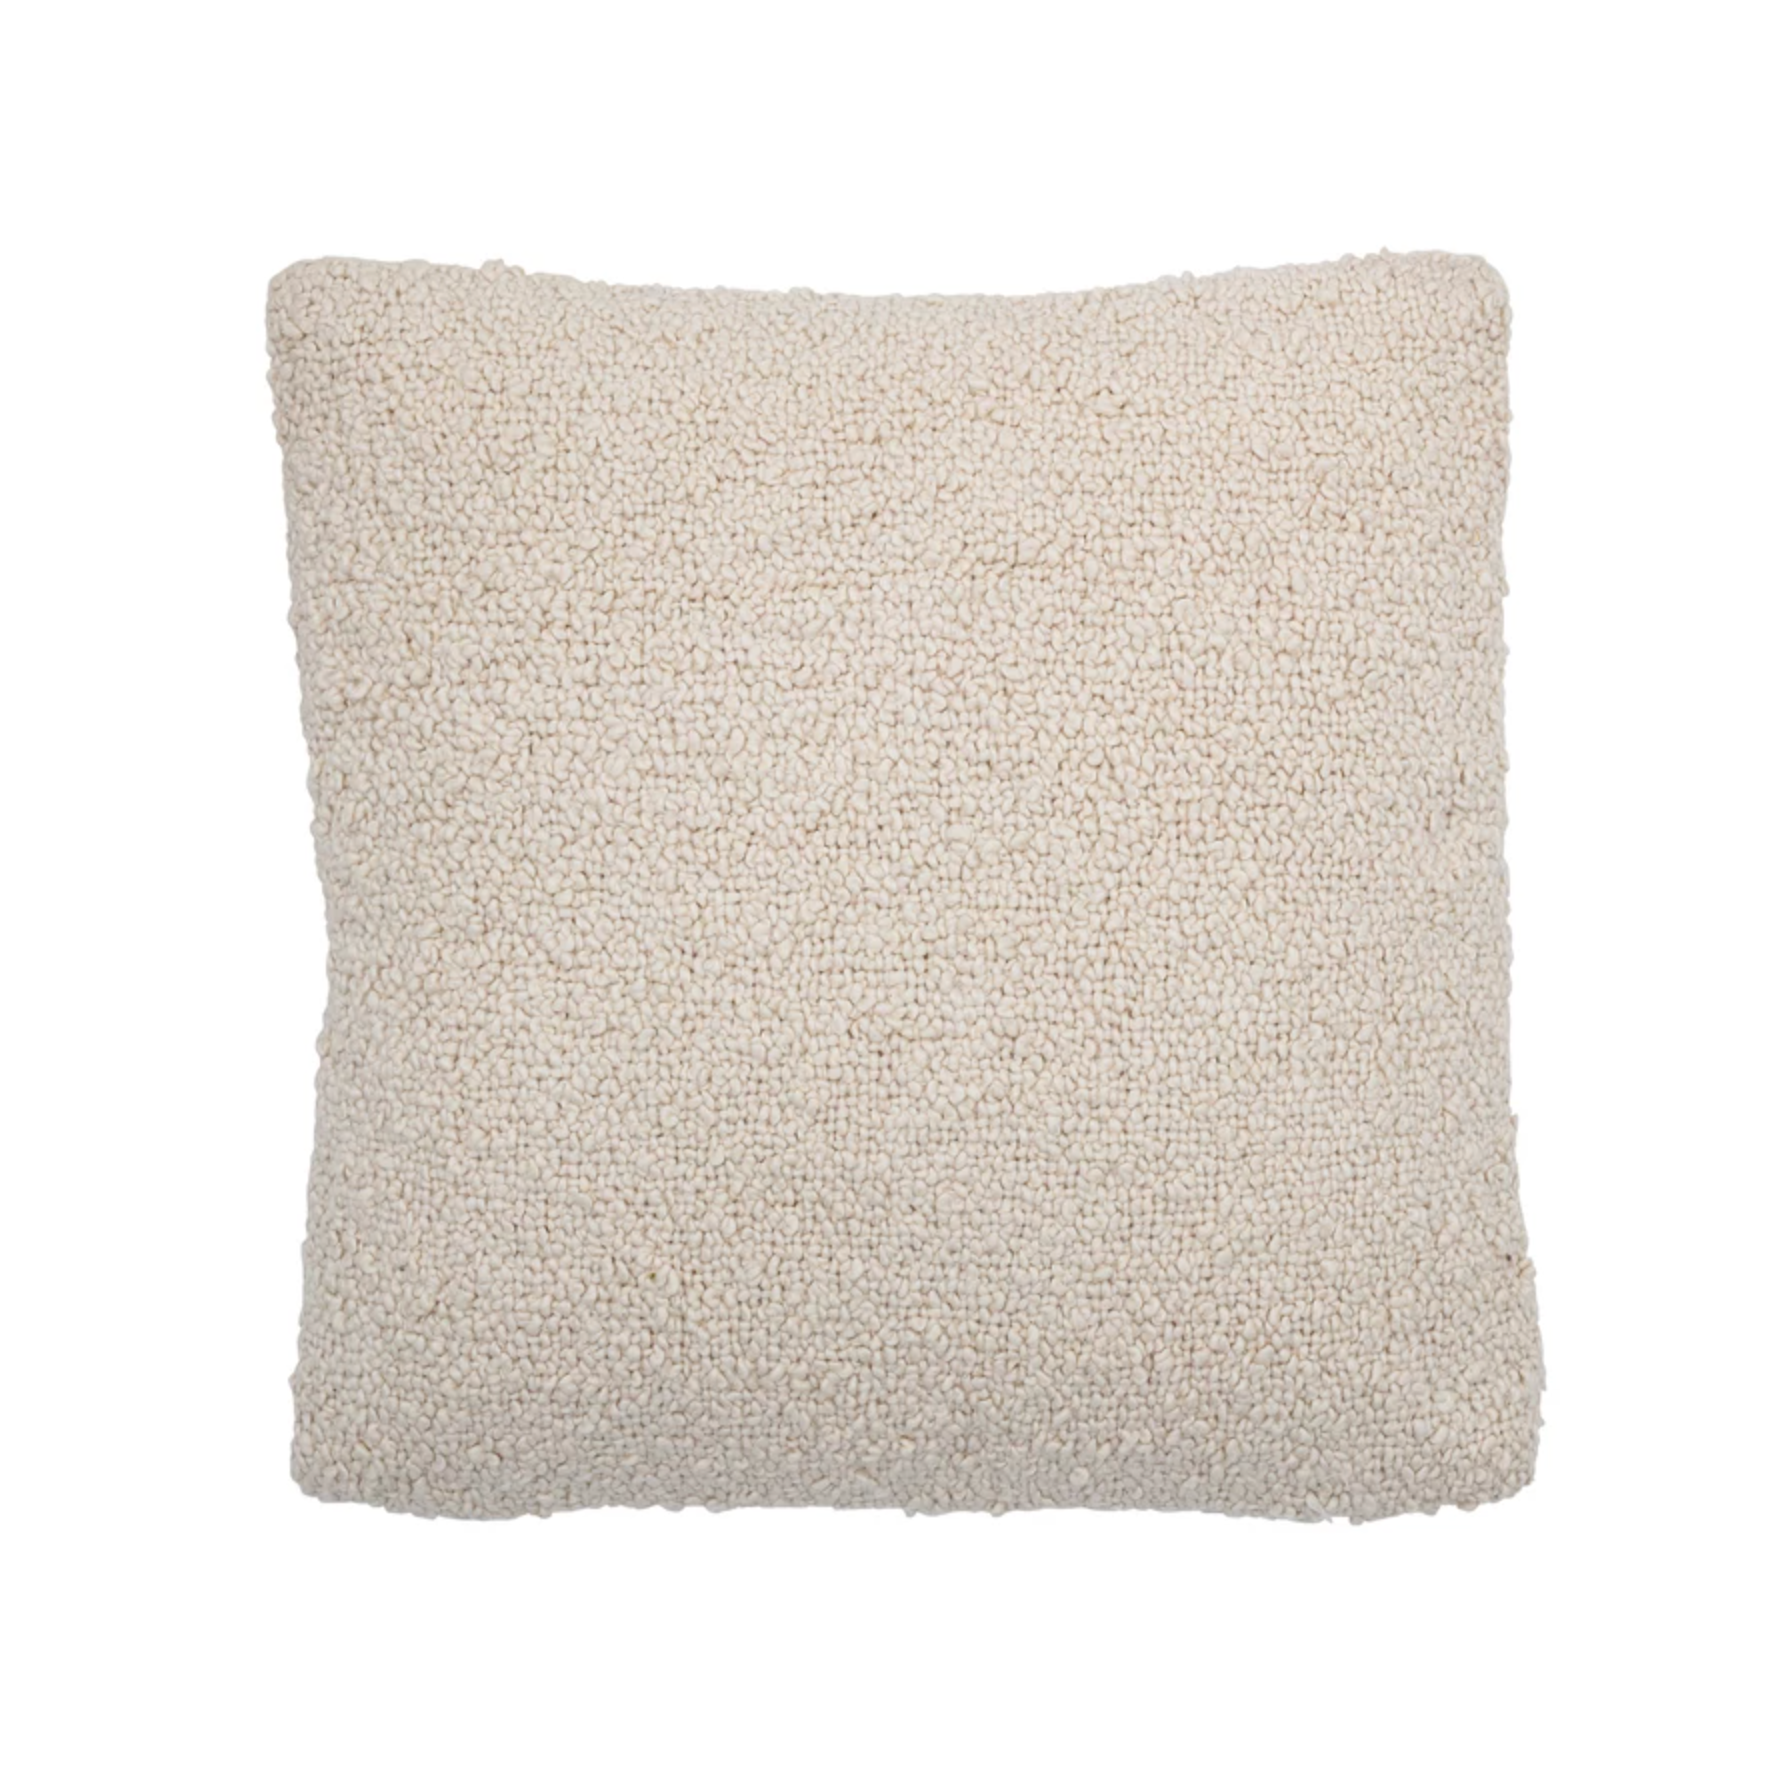 Cream on Cream Handwoven Textured Pillow Cover – Coterie, Brooklyn